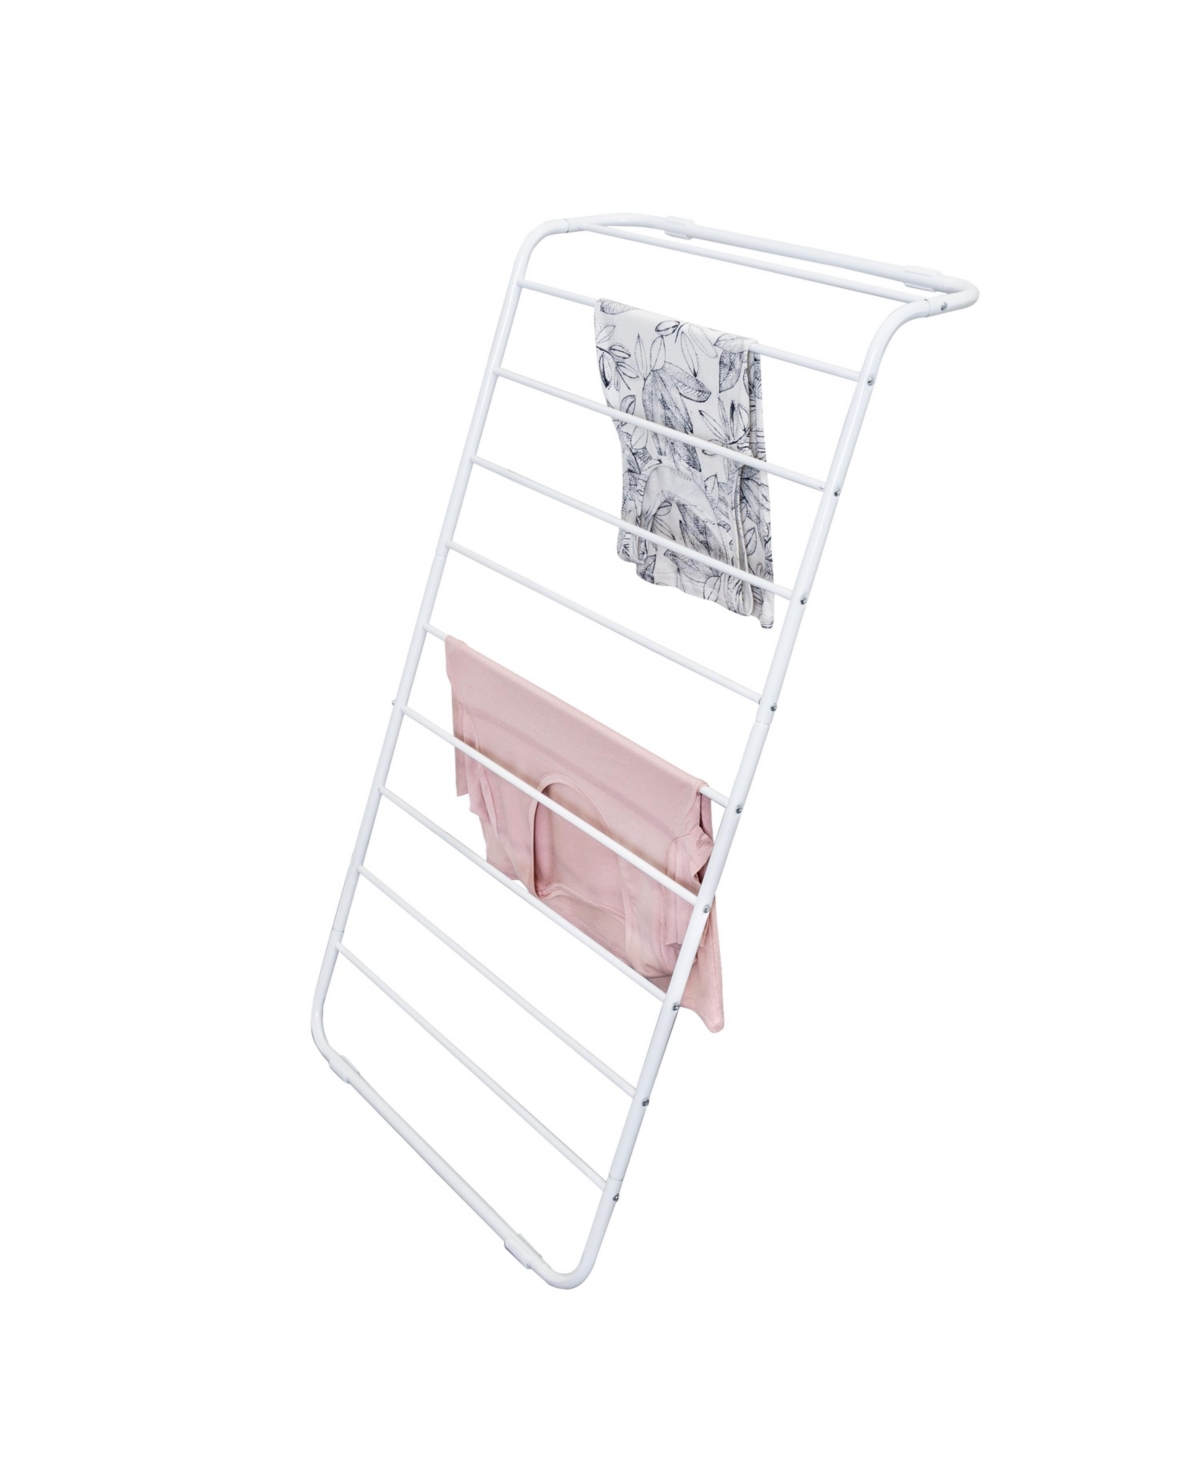 Leaning Clothes Drying Rack, White - White